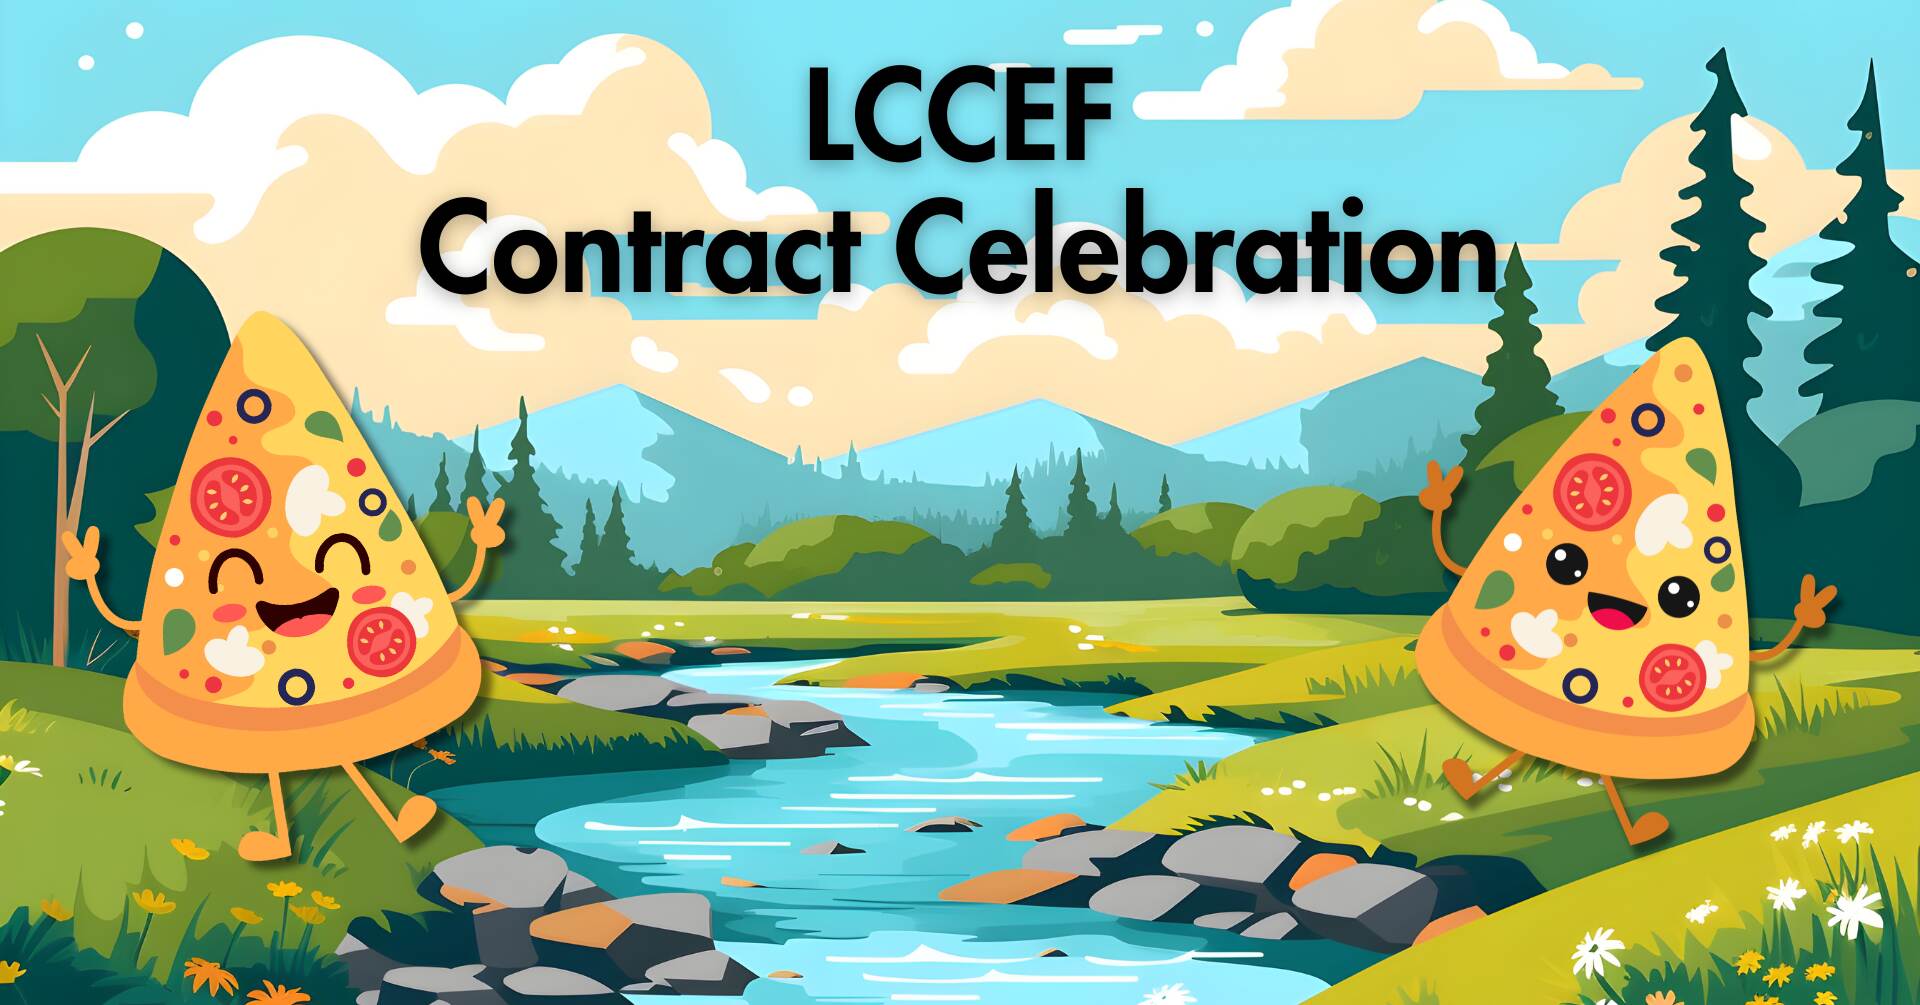 an illustration with happy dancing pizza slices in front of a river and text reading "LCCEF Contract Celebration"